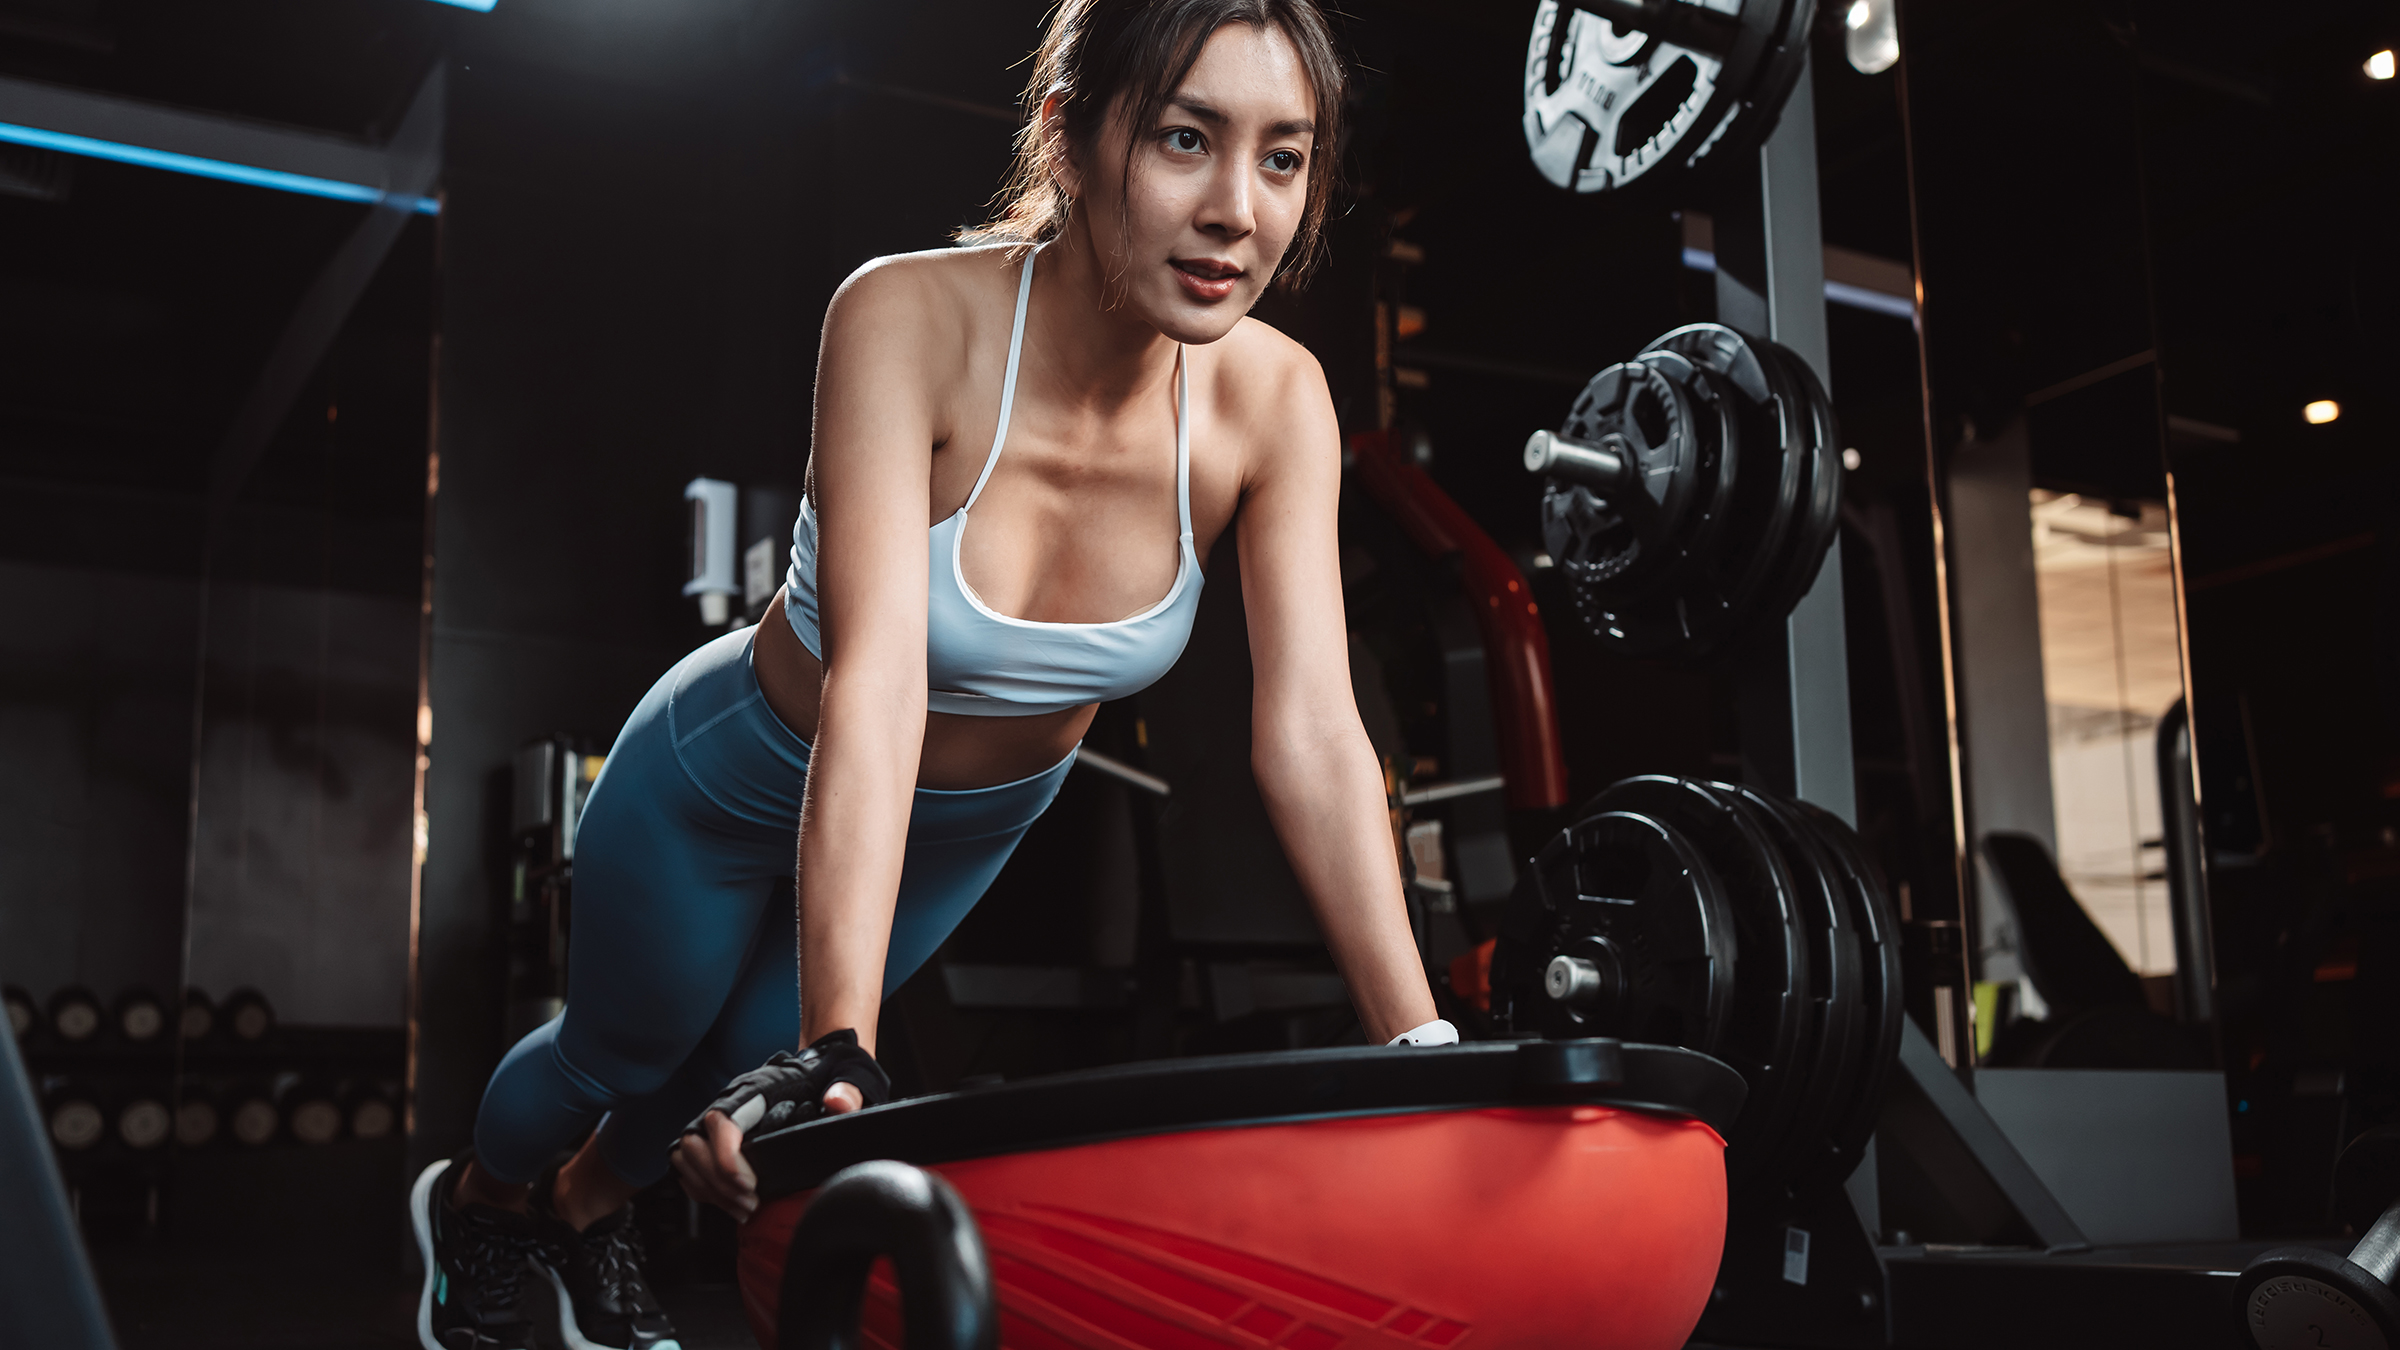 5 Simple Ways to Overcome Your Gym Anxiety